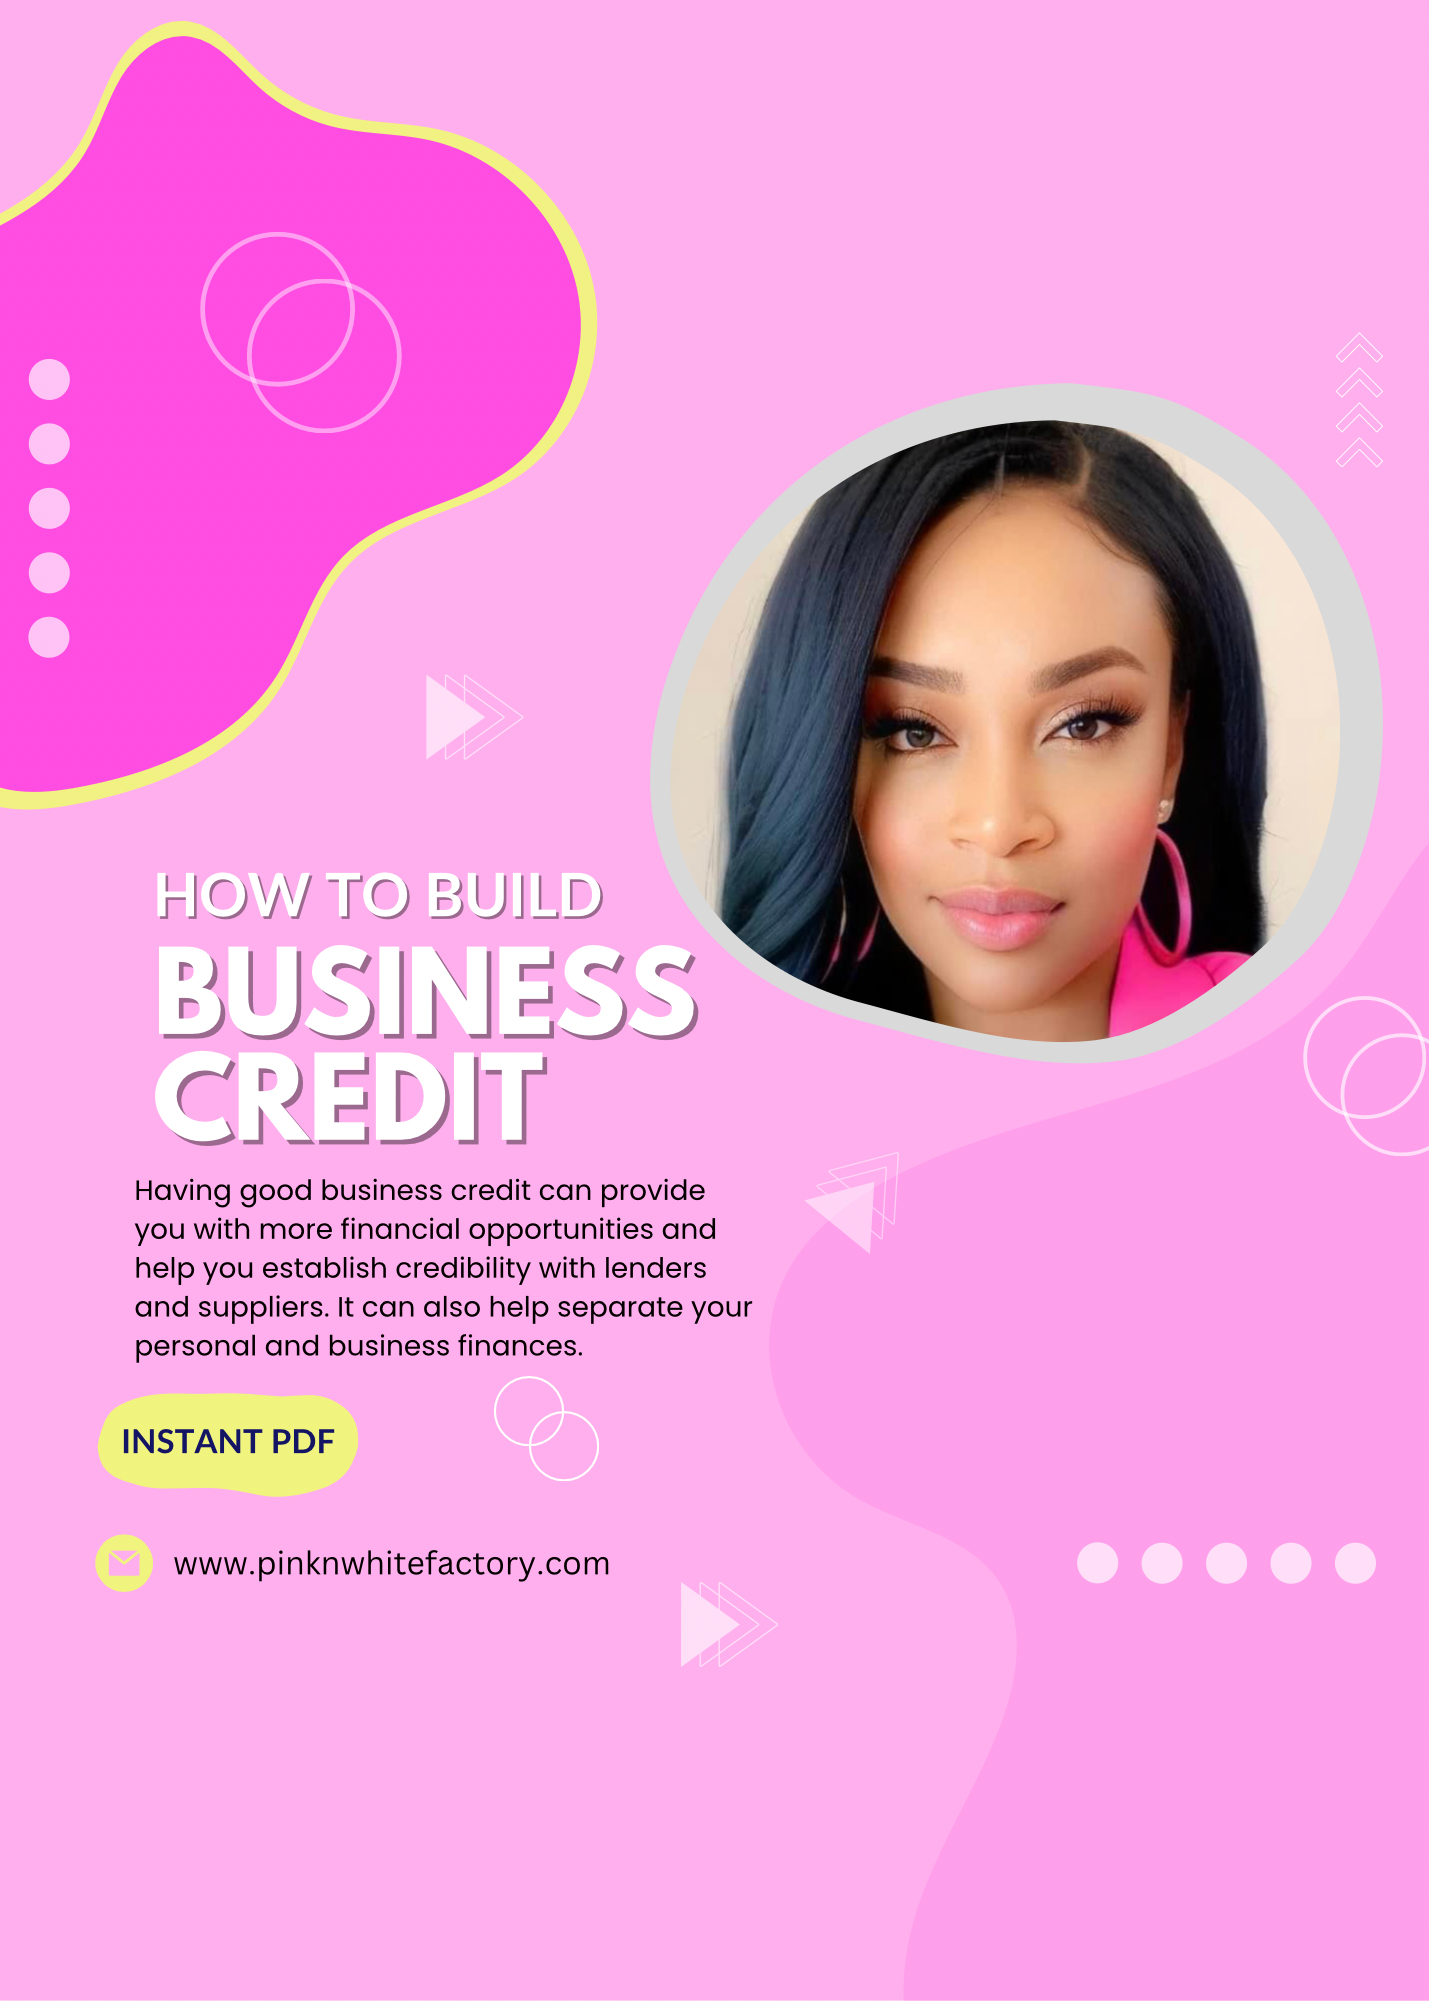 How To Build Business Credit: Get $20,000 Business Credit in 1 Month!